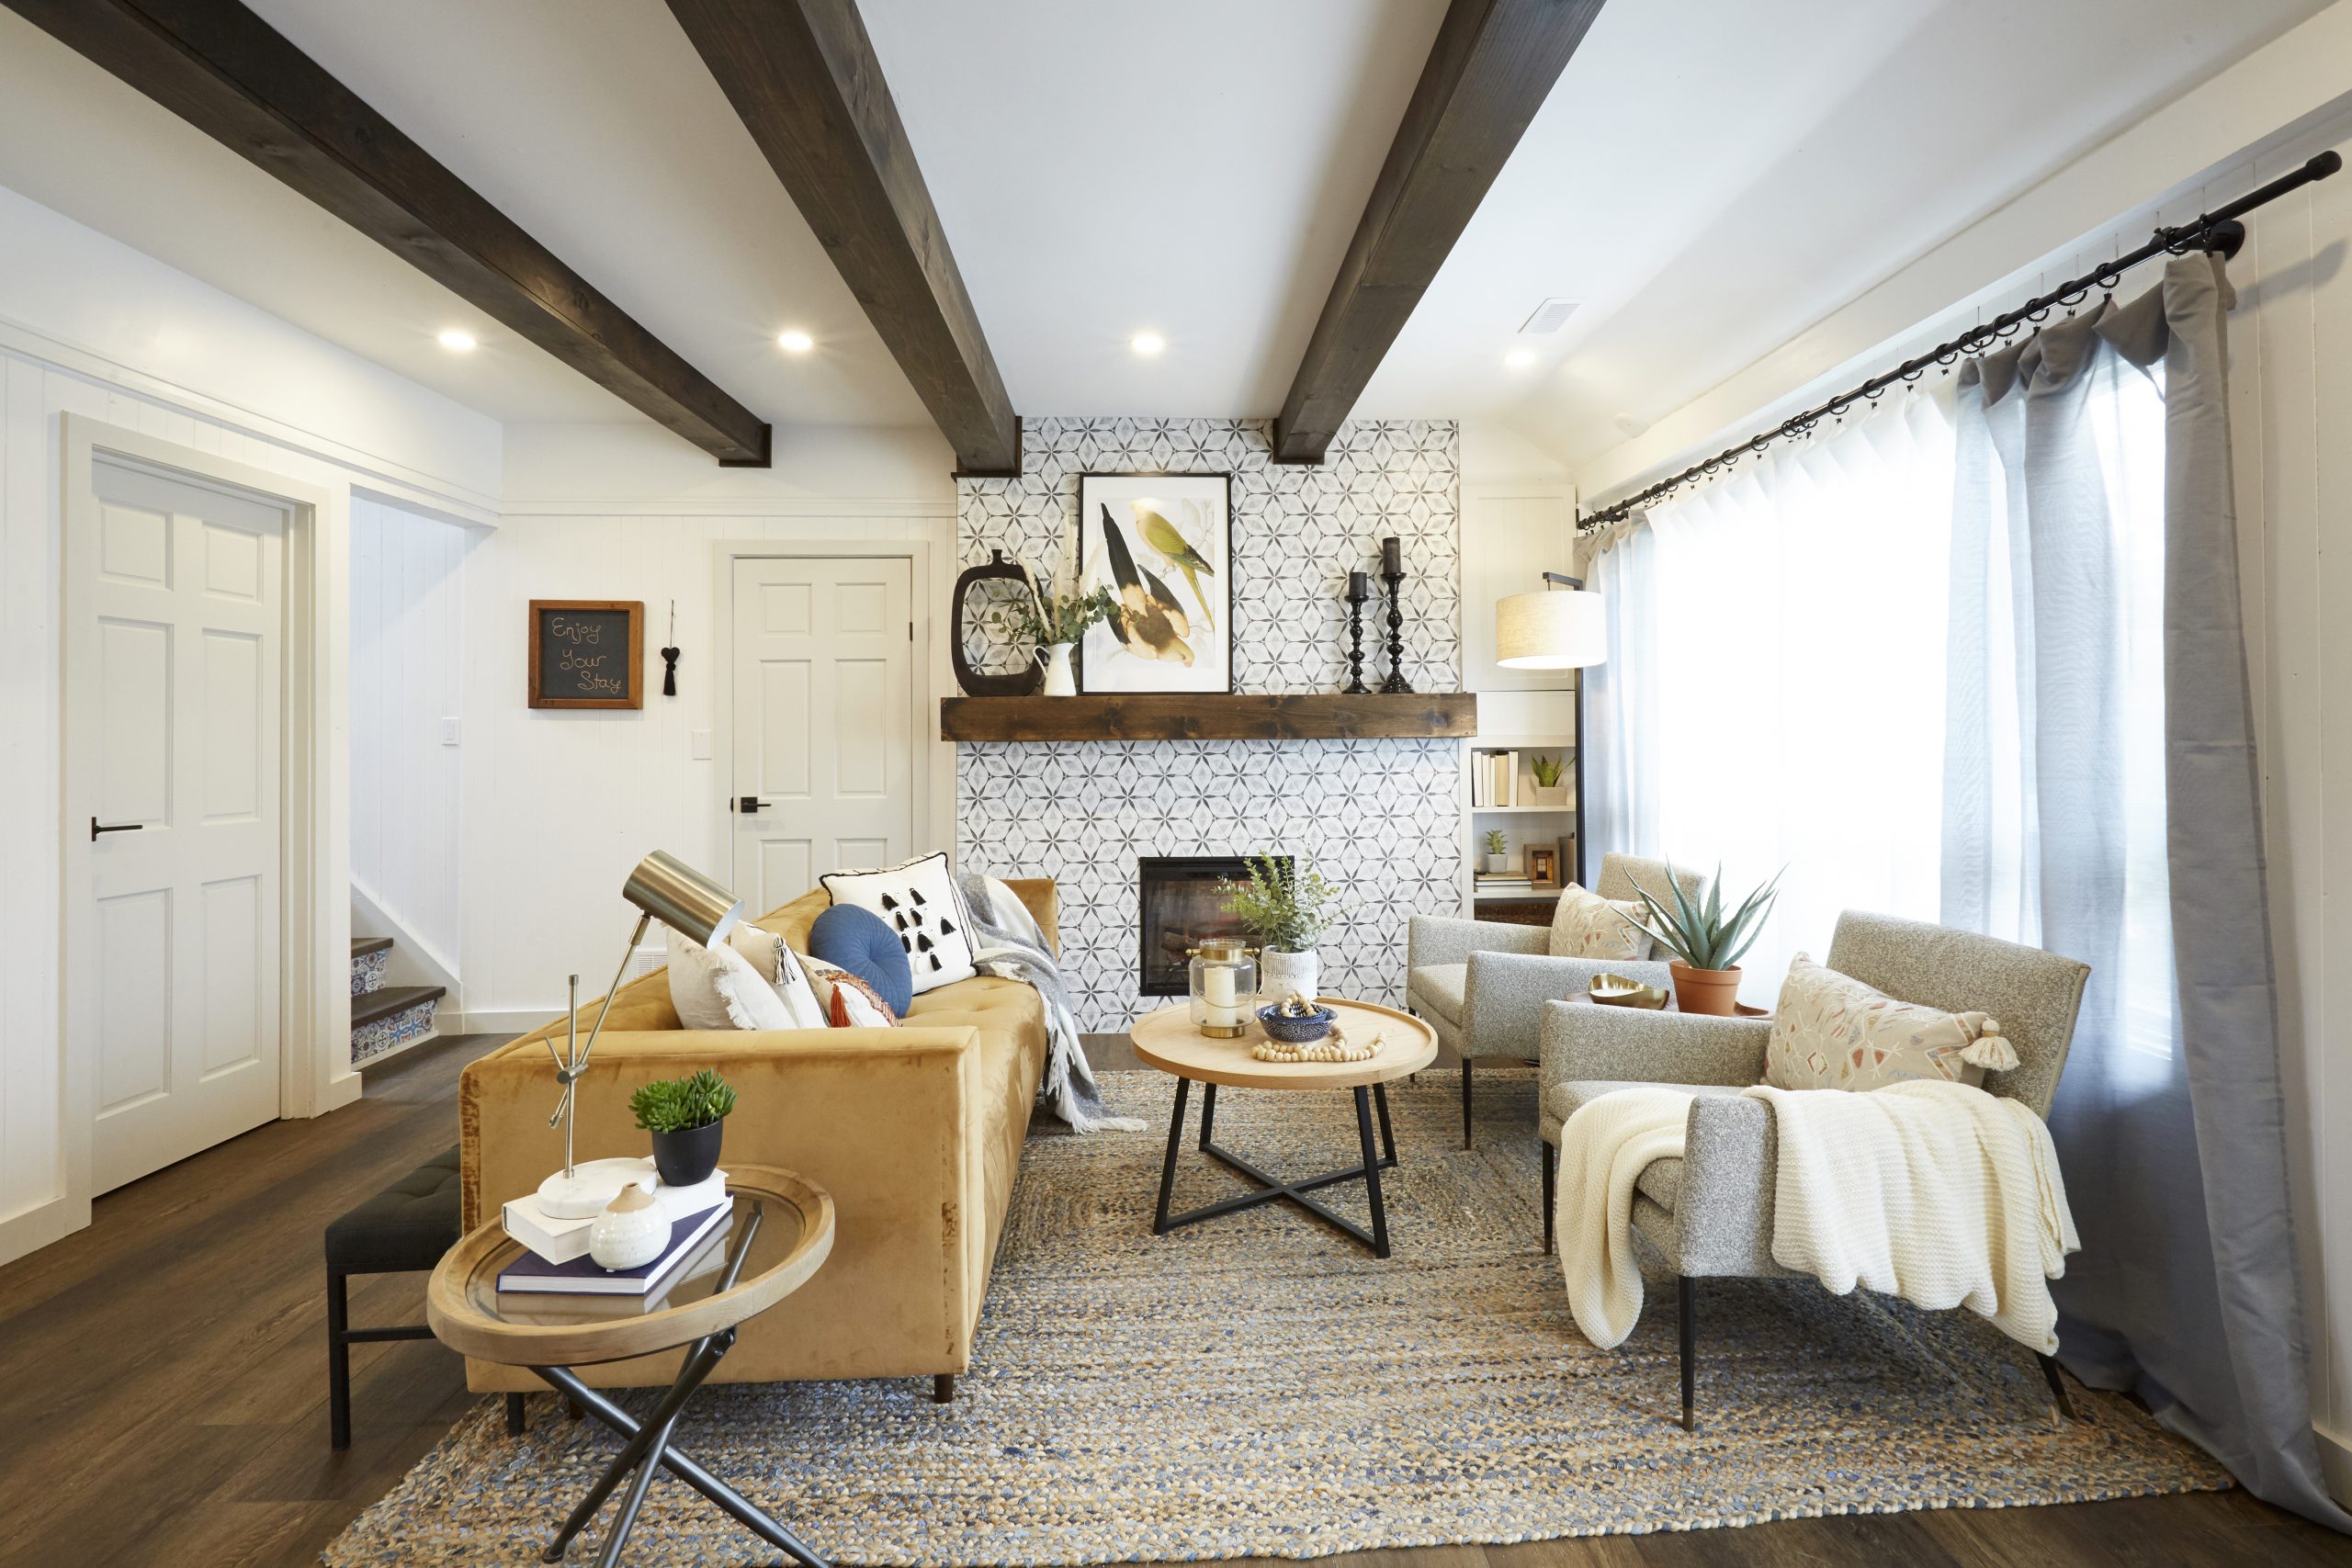 Cozy living room with tiled fireplace and exposed beams